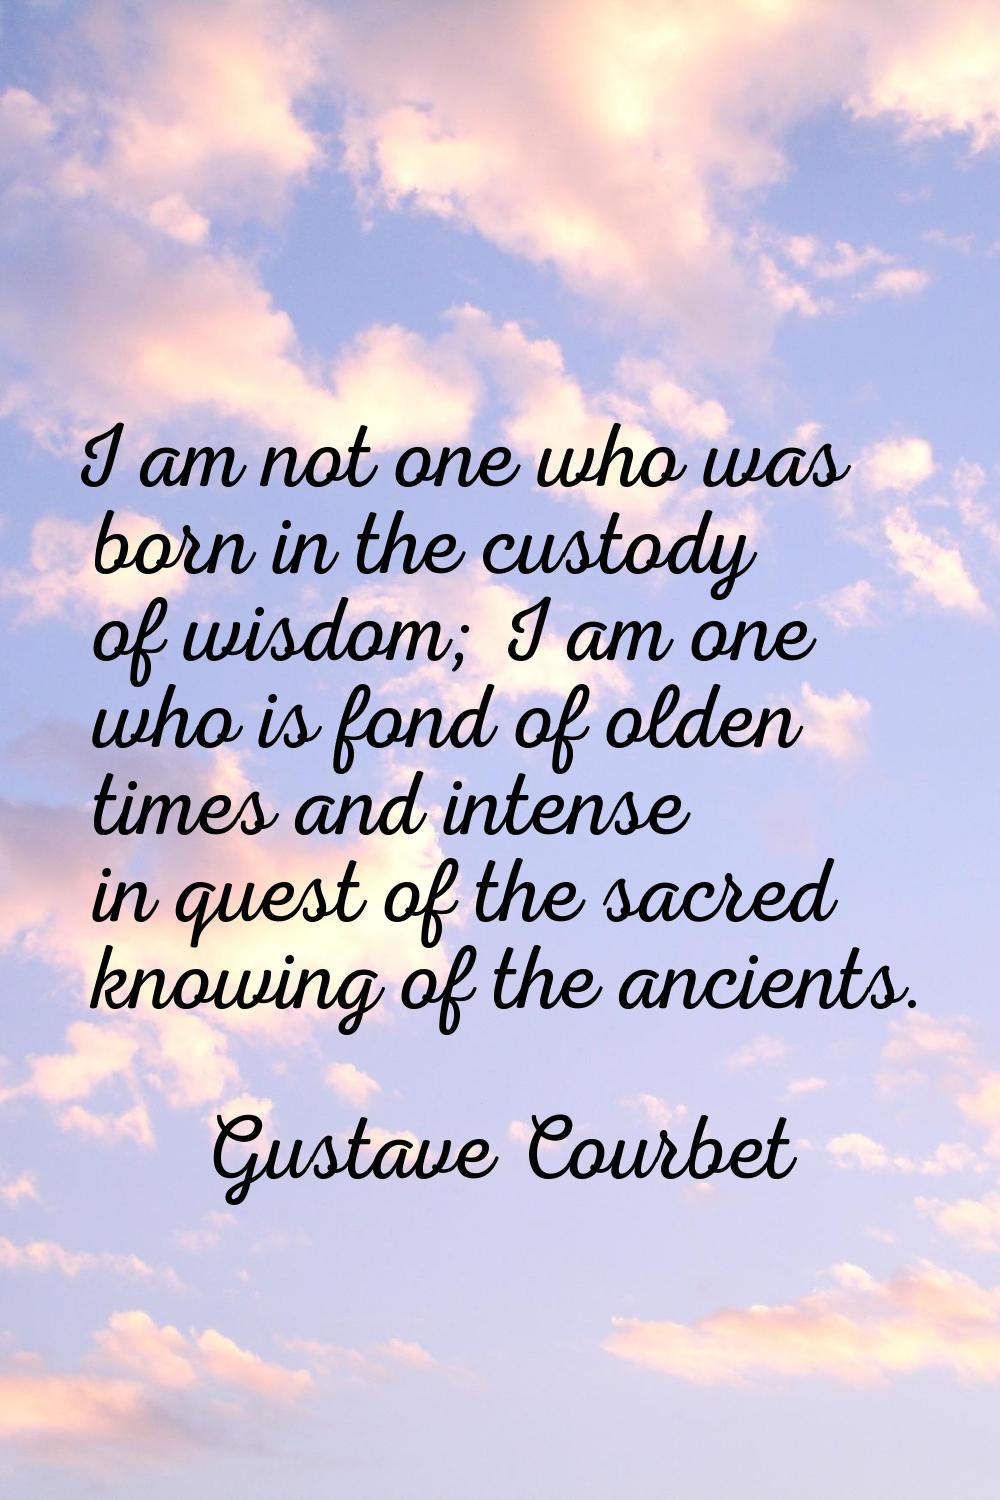 I am not one who was born in the custody of wisdom; I am one who is fond of olden times and intense